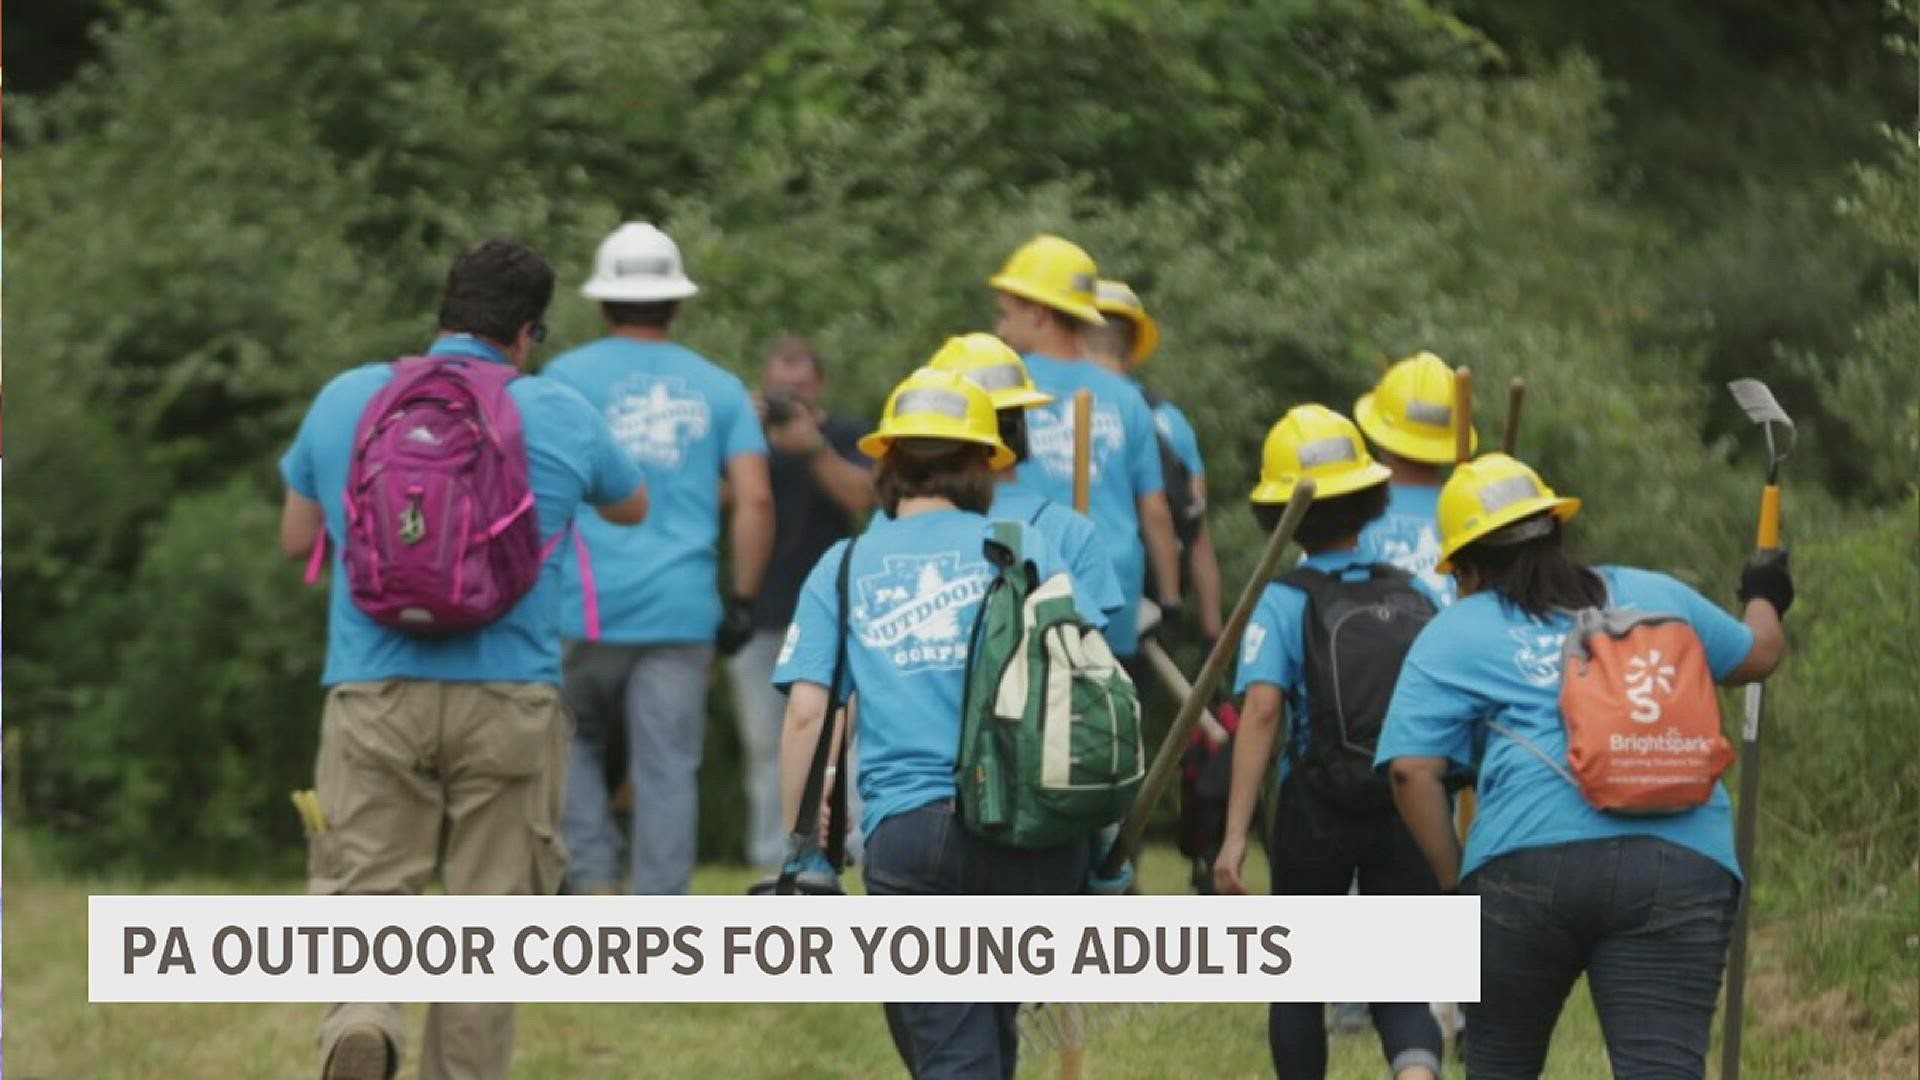 This summer the "PA Outdoor Corps" will have the opportunity to help the environment while also earning money.